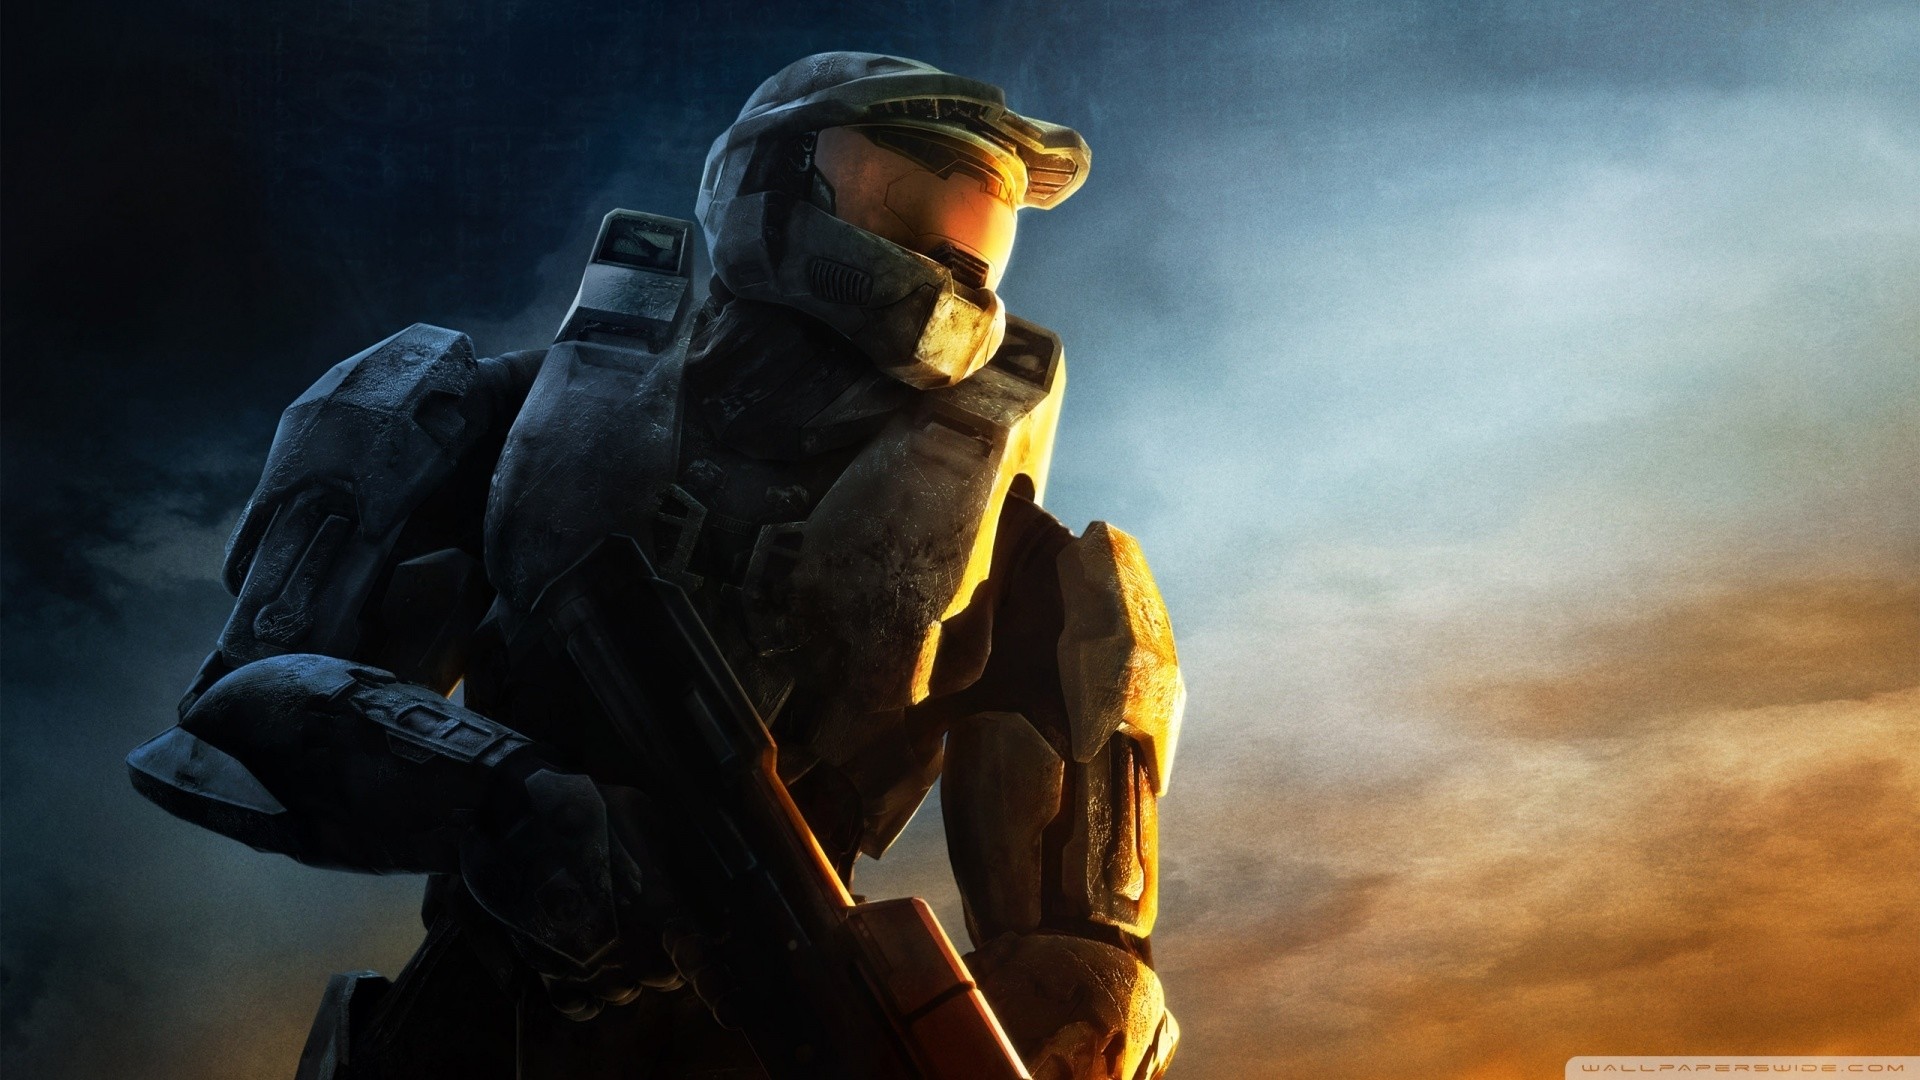 1920x1080 Title : master chief, halo game â¤ 4k hd desktop wallpaper for 4k ultra hd.  Dimension : 1920 x 1080. File Type : JPG/JPEG